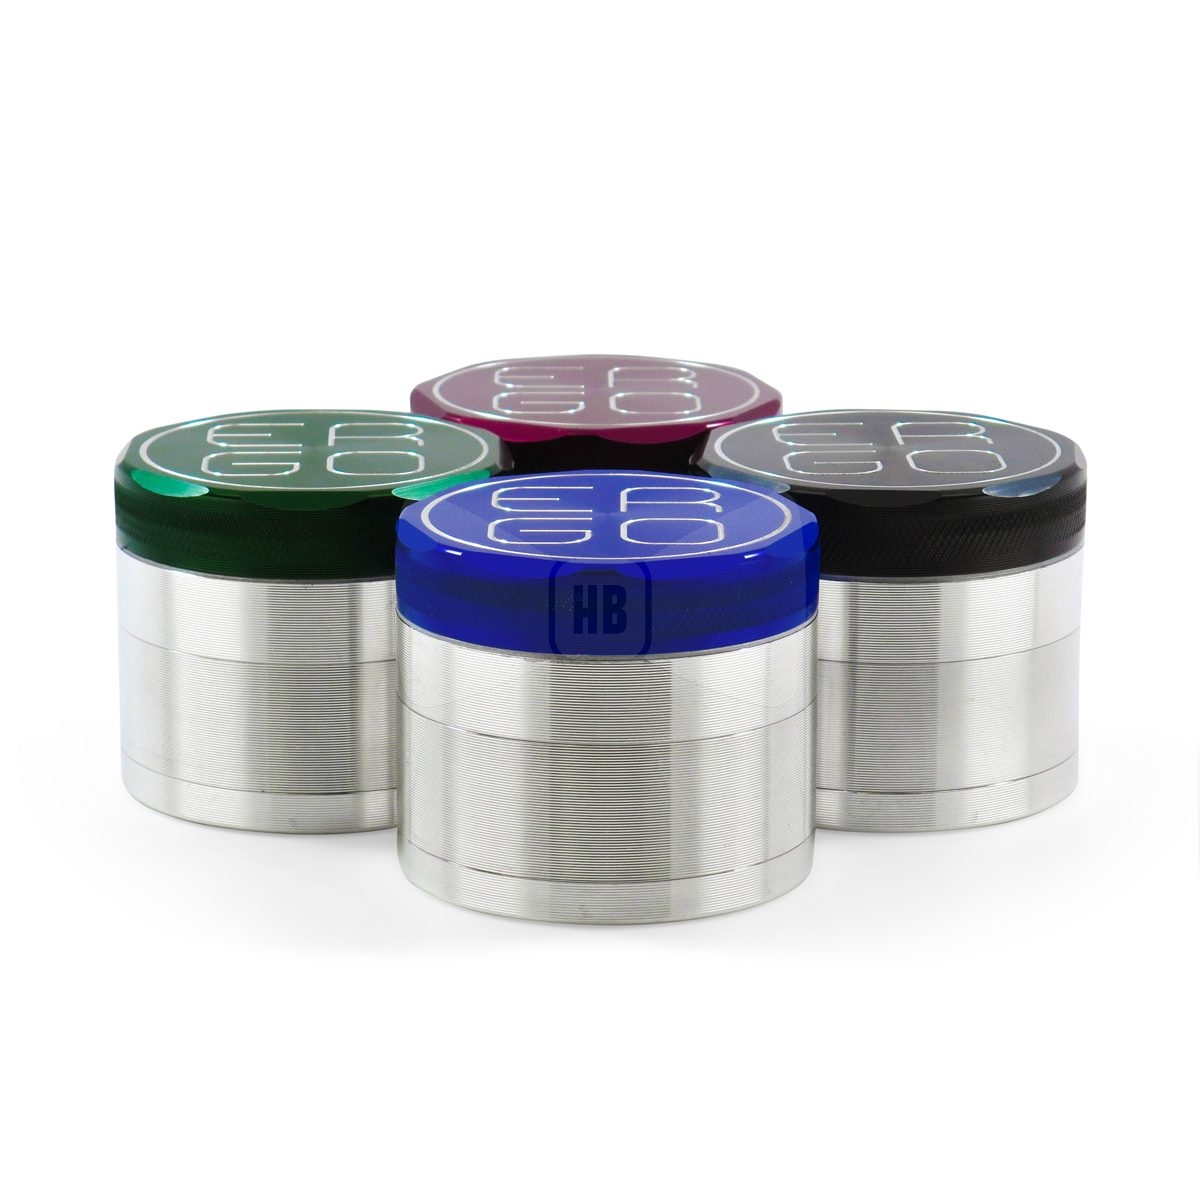 ERGO 4 Piece 63mm Grinder with Removable Screen Purple